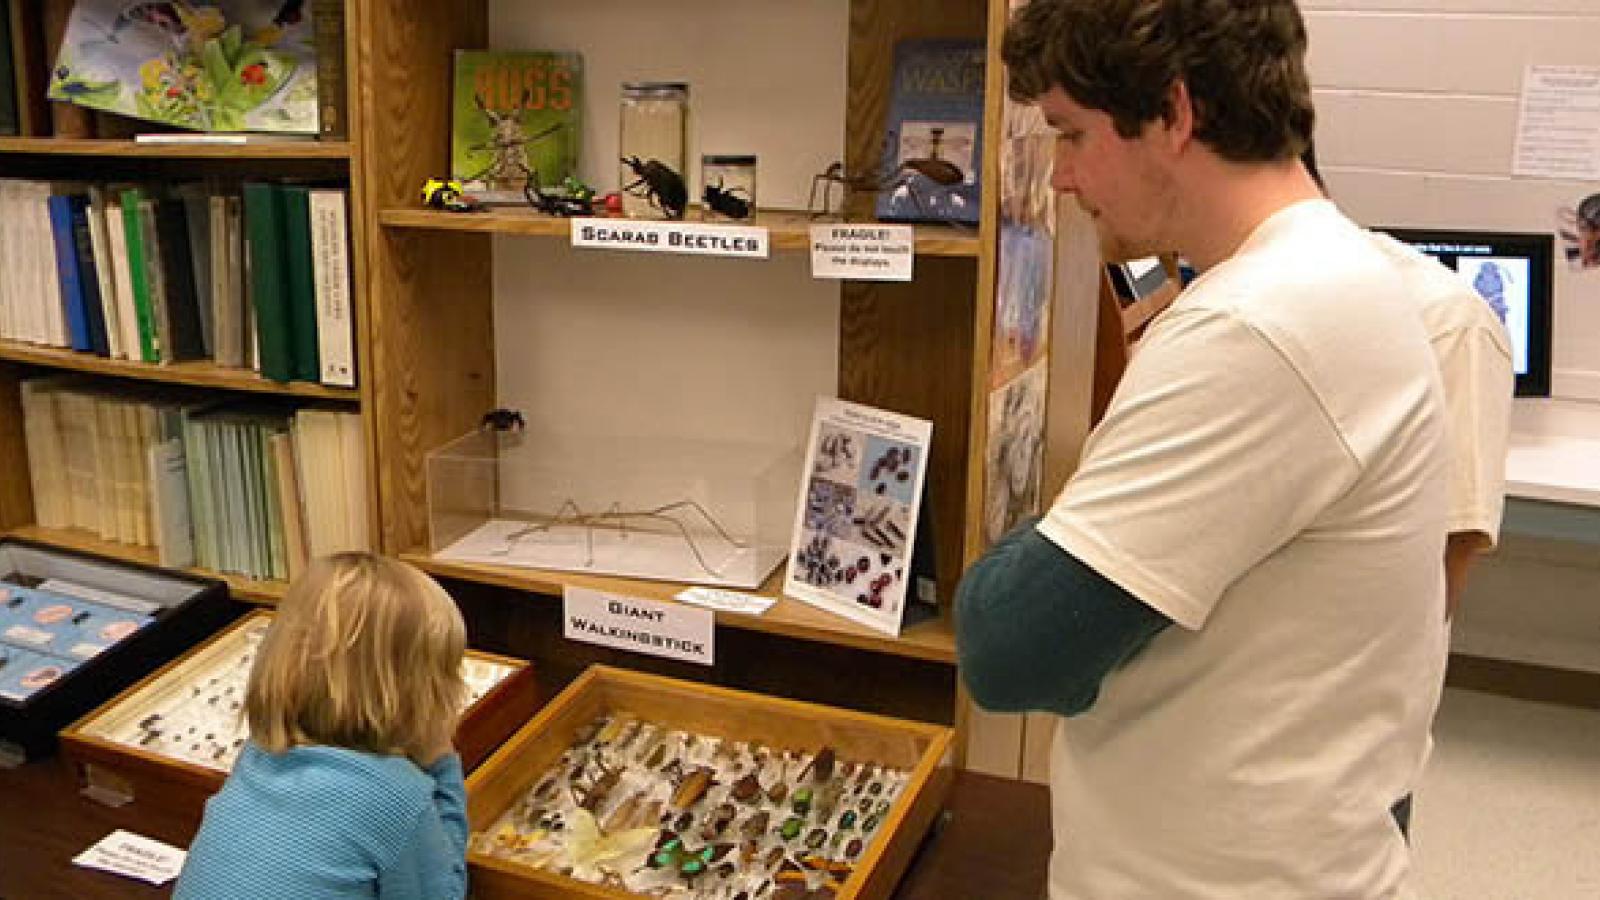 Joe Cora with visitor at the Triplehorn Insect Collection